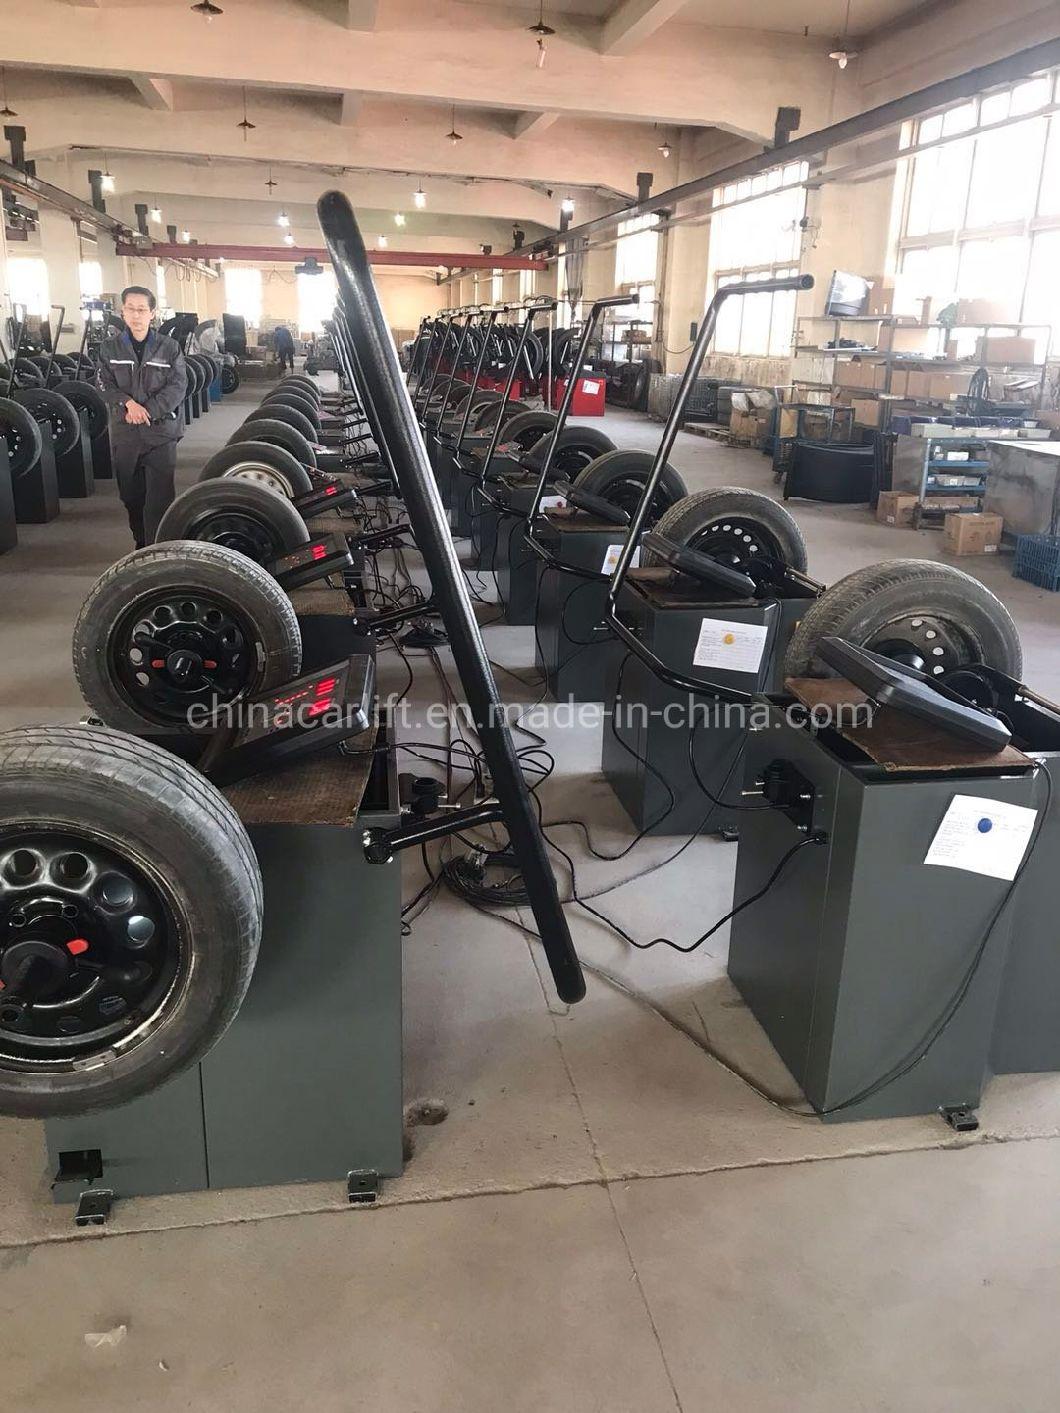 Tire Changer and Wheel Balancer for Auto Repair Shop Machine Equipment Factory Price